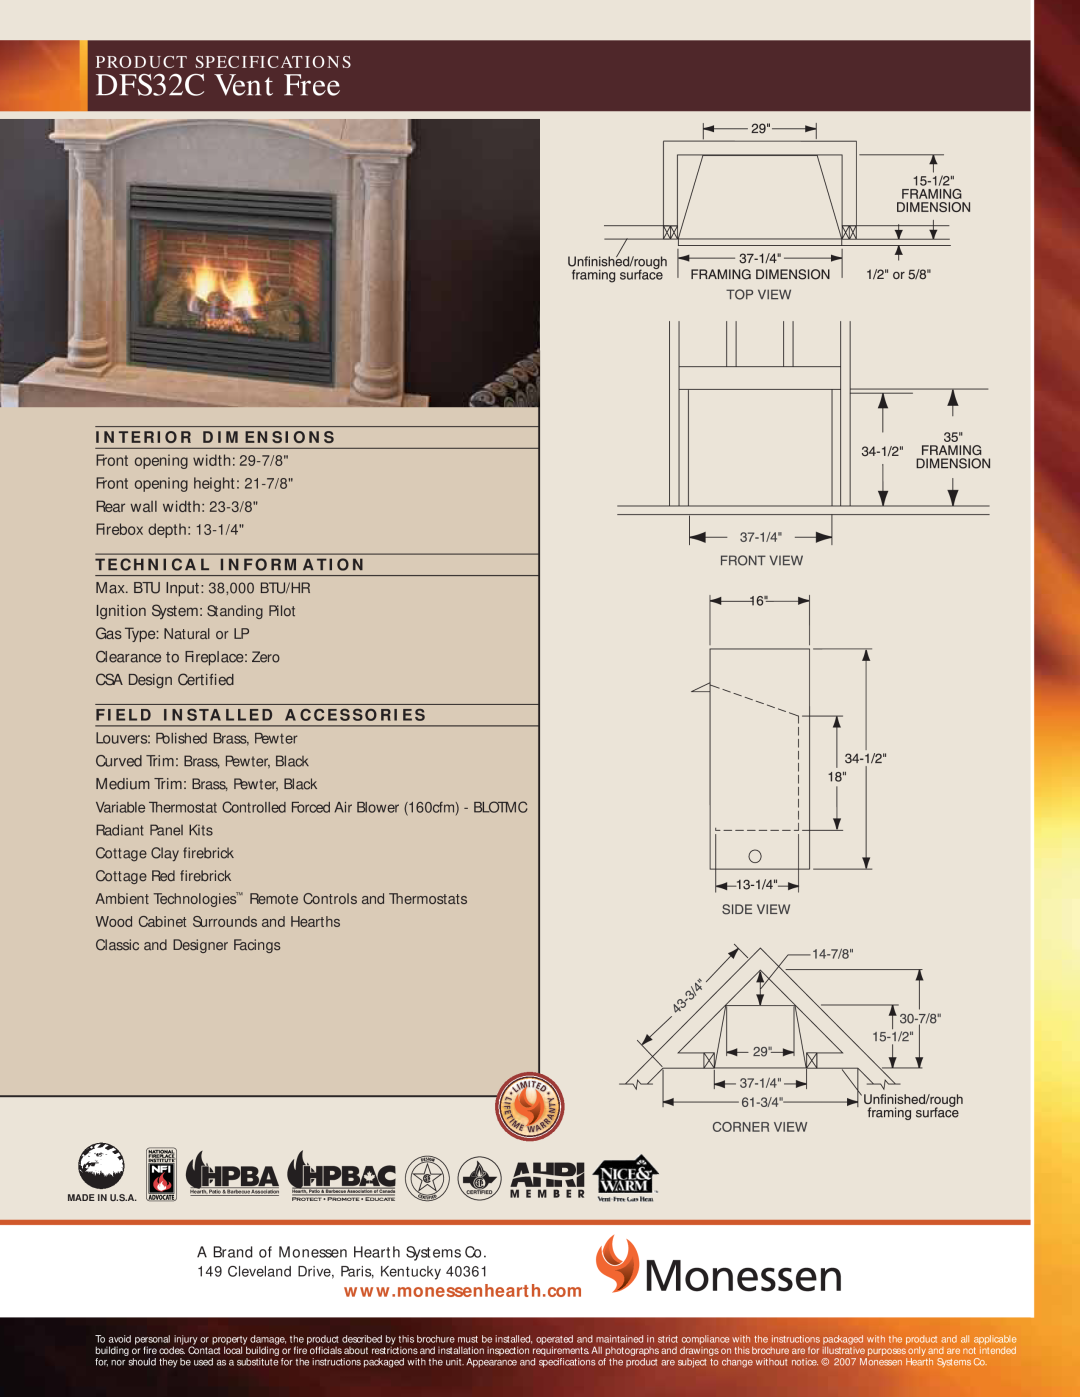 Monessen Hearth specifications DFS32C Vent Free, Product Specifications 